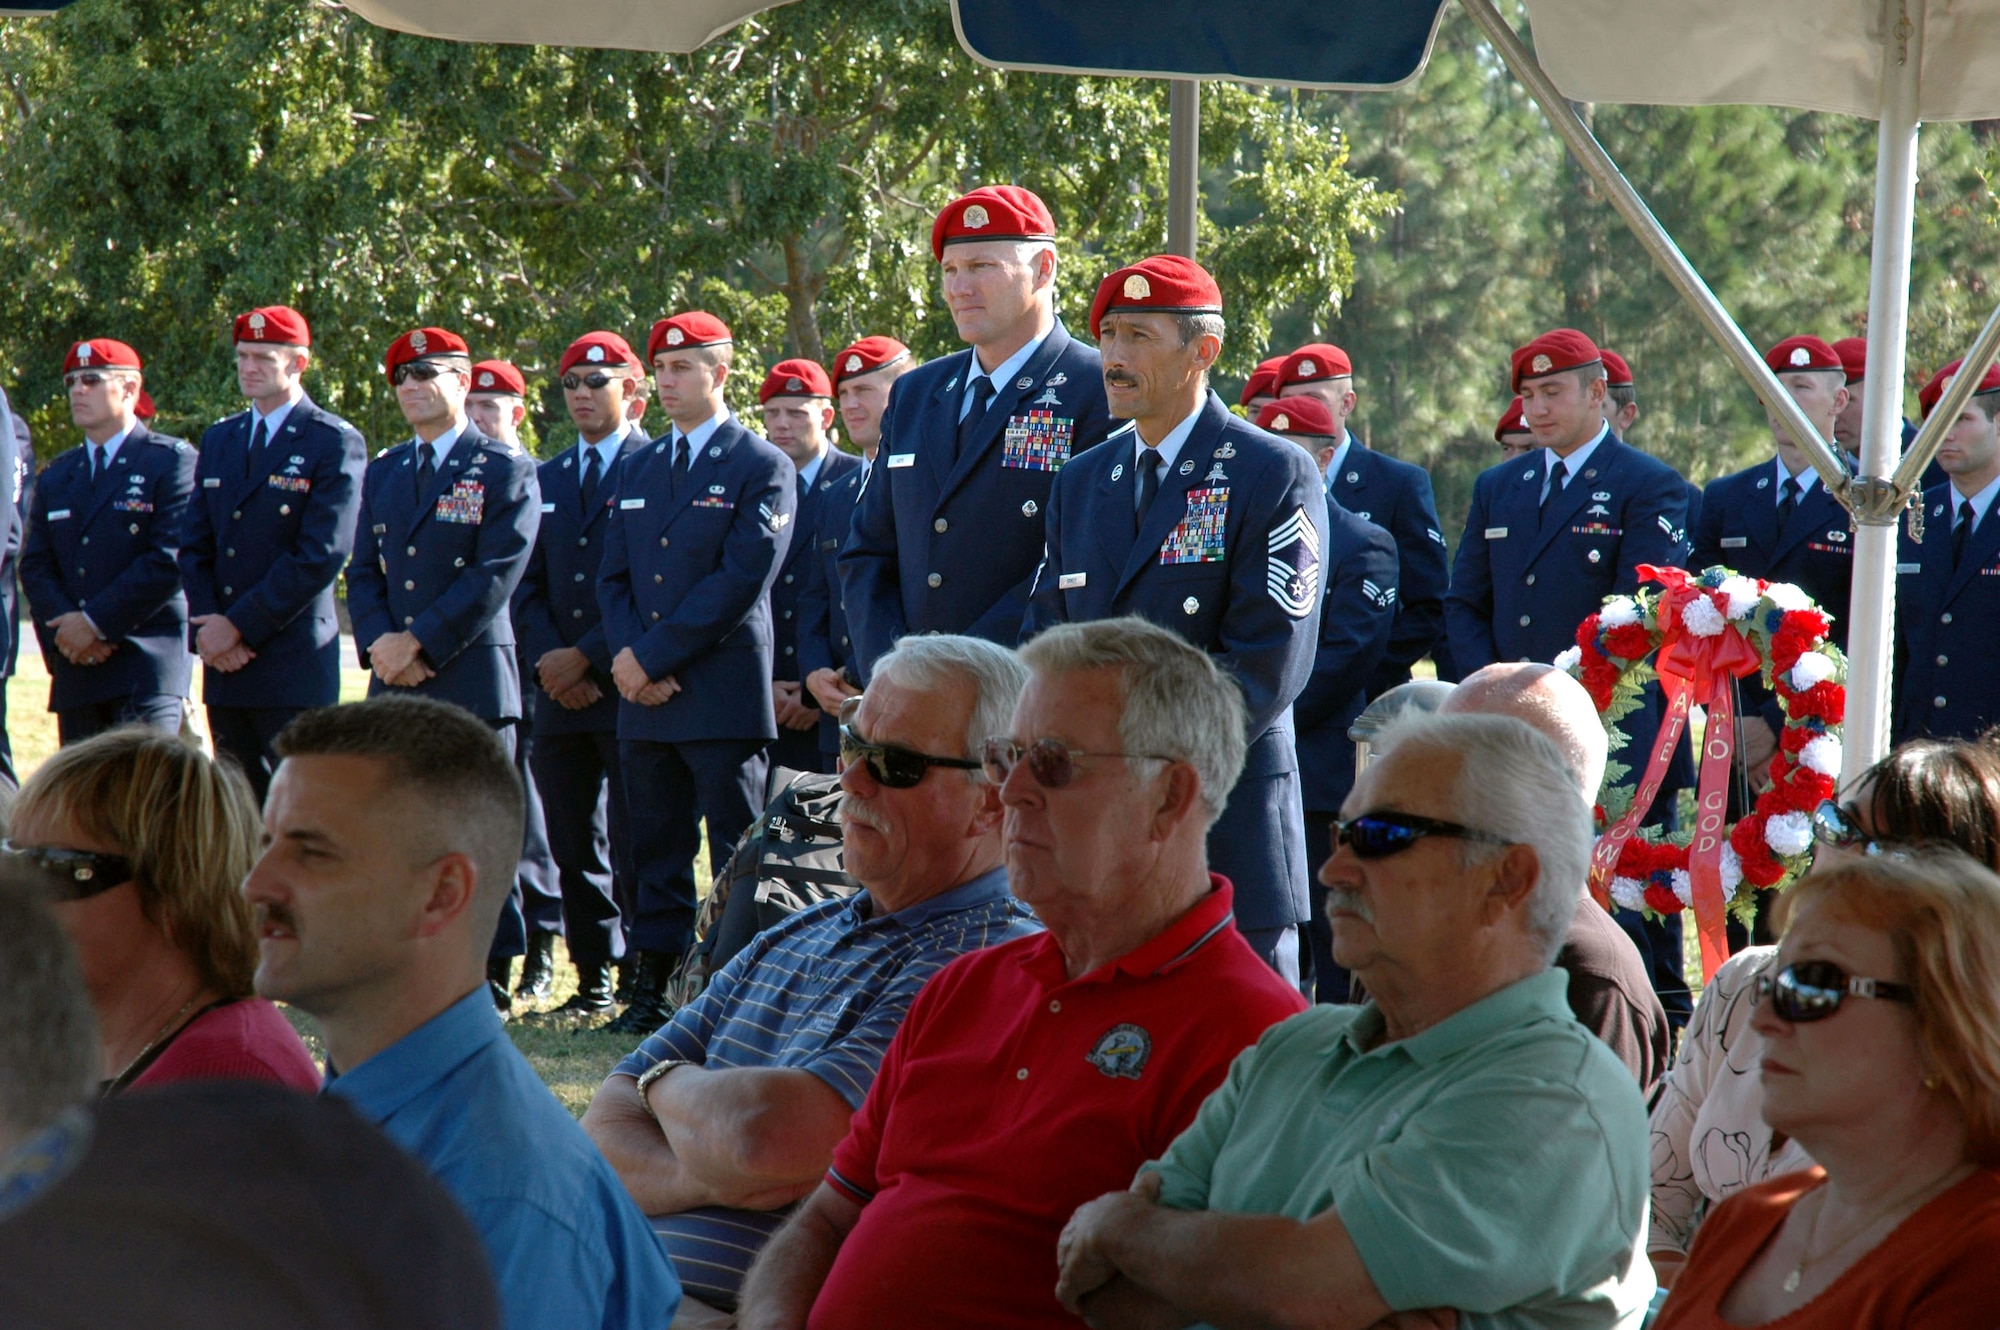 More than 100 people gathered to honor fallen combat controllers and special tactics officers during the Annual Combat Control Association reunion Nov. 3 at Hurlburt Field, Fla. Family members of fallen controllers laid a wreath in dedication to all fallen heroes. (U.S. Air Force photo/Dawn Hart)
